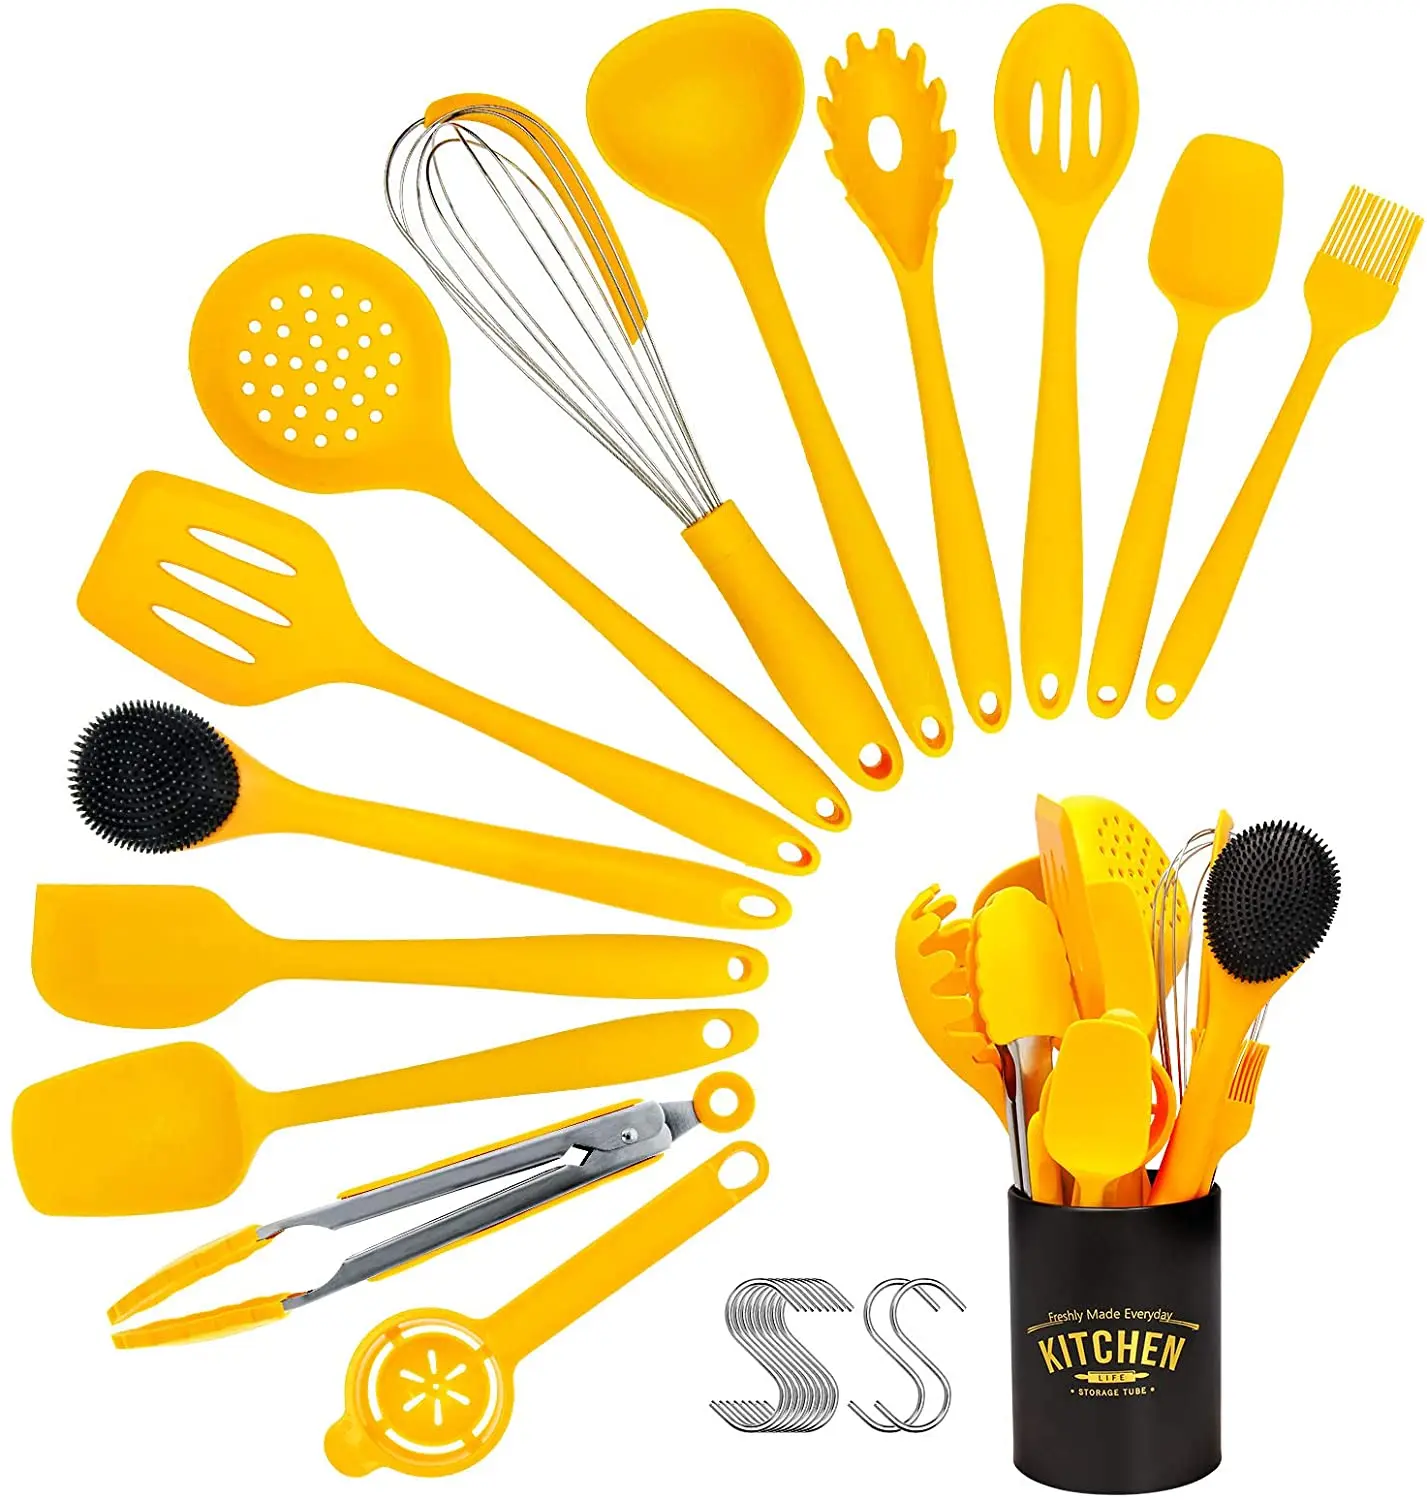 14pcs Kitchen Utensil Set Yellow with 10 S-Hooks Non-Stick Heat Resistant Silicone Spatula Colander Set Cookware Kitchen Tools